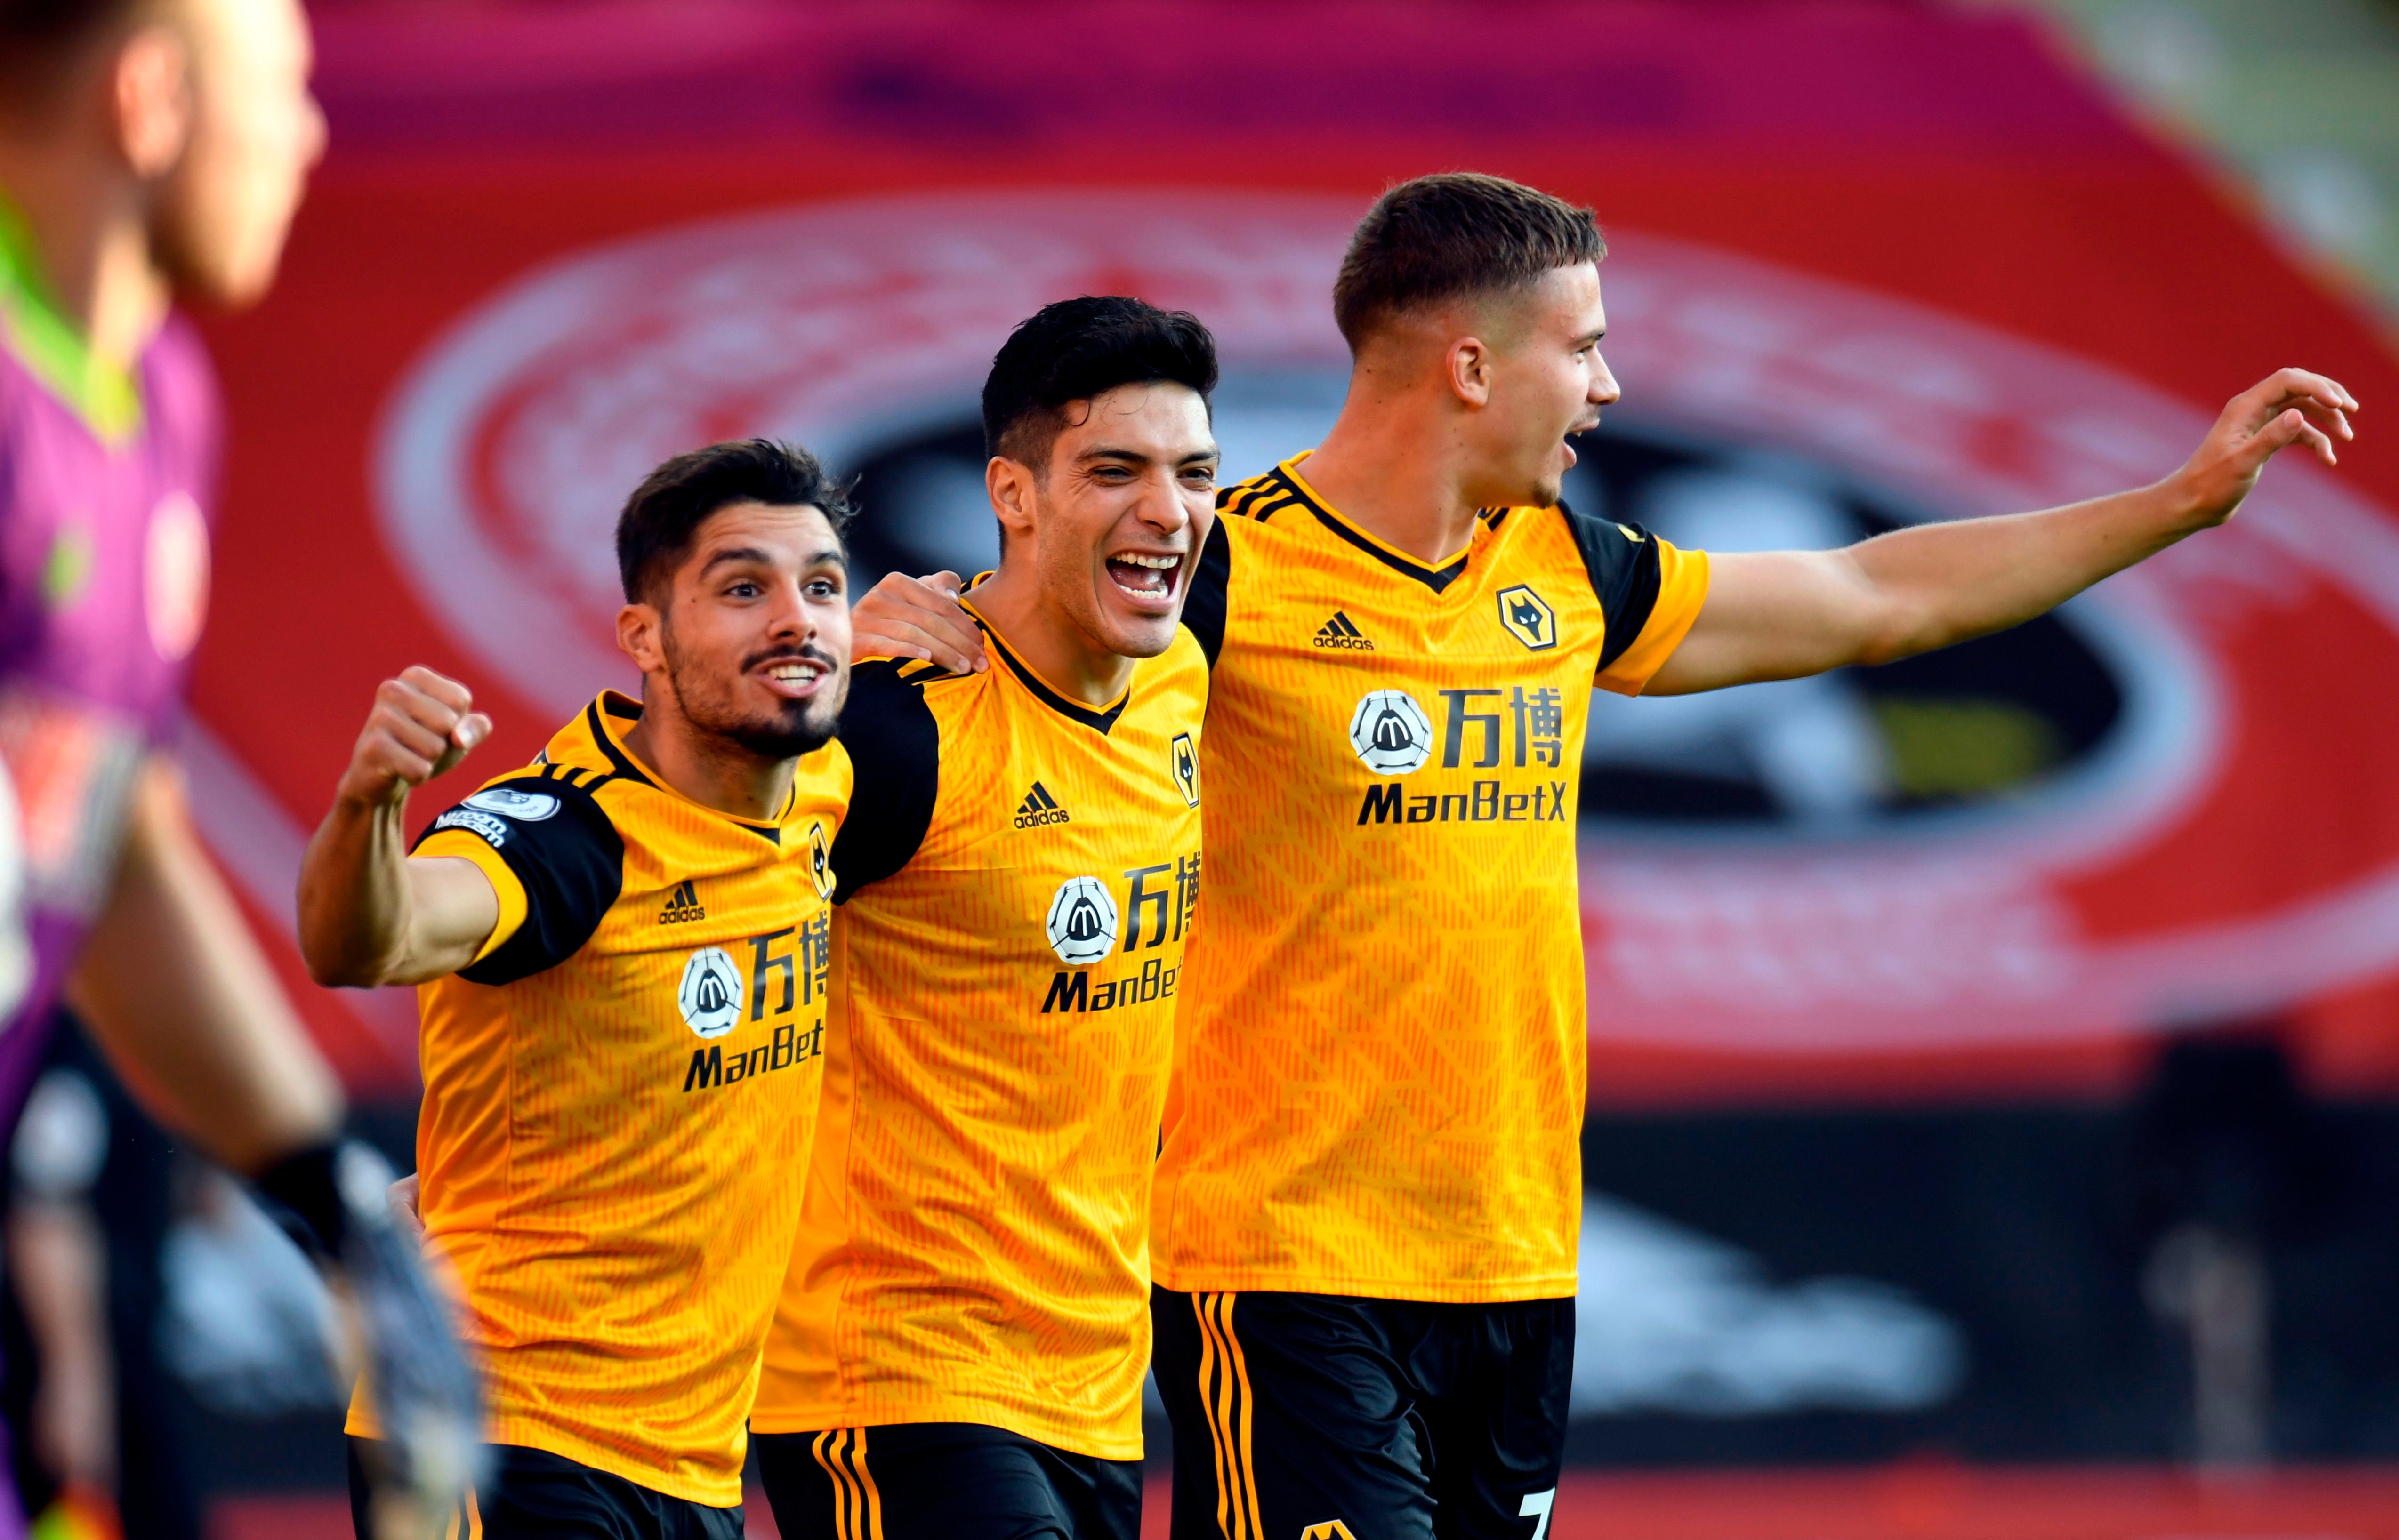 Wolves celebrate after Raul Jimenez, centre, scored their opener